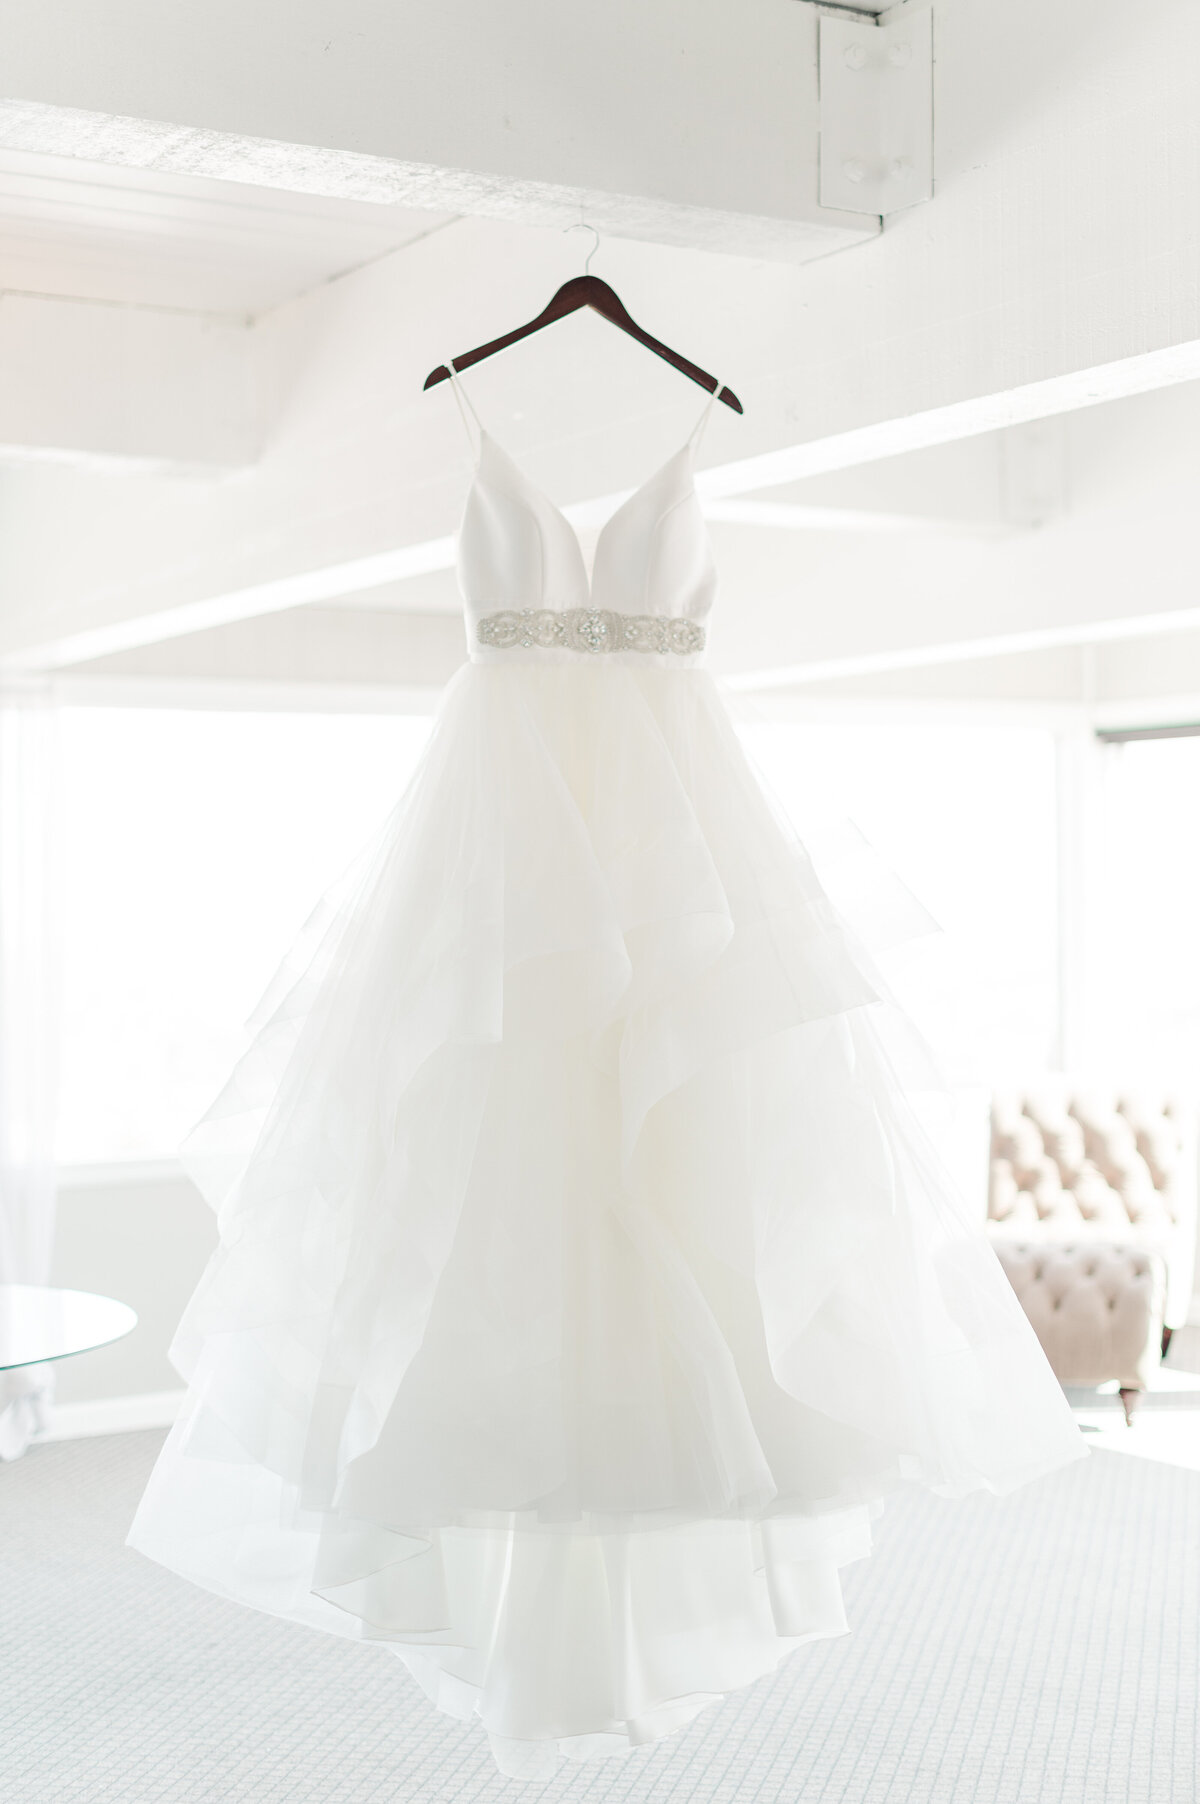 brides dress hanging from the ceiling in a beautifully lit room